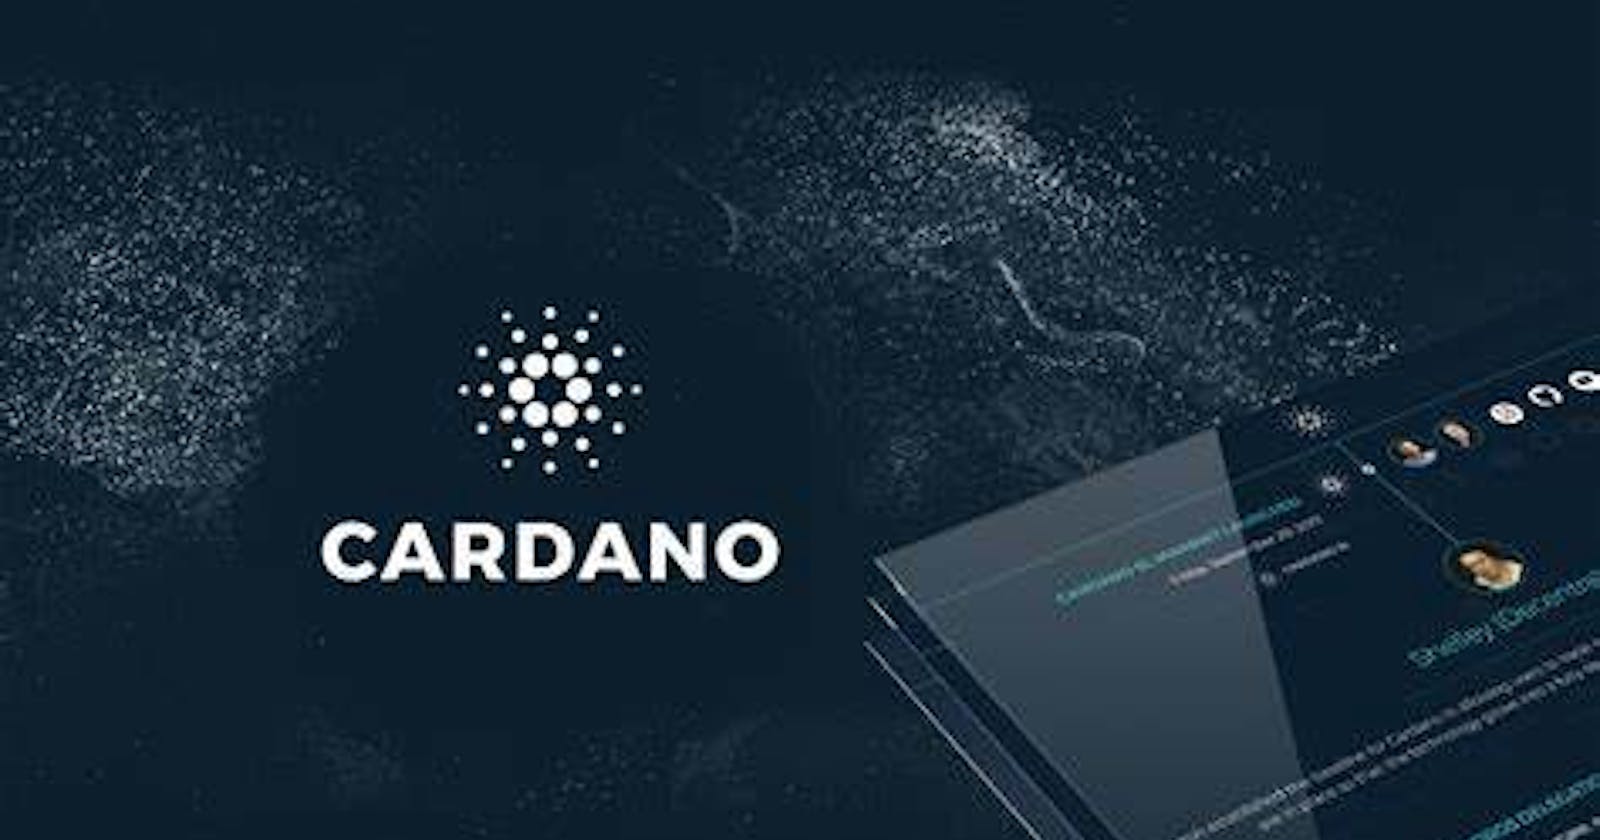 Cardano will soon be offered on the world’s first digital asset bank